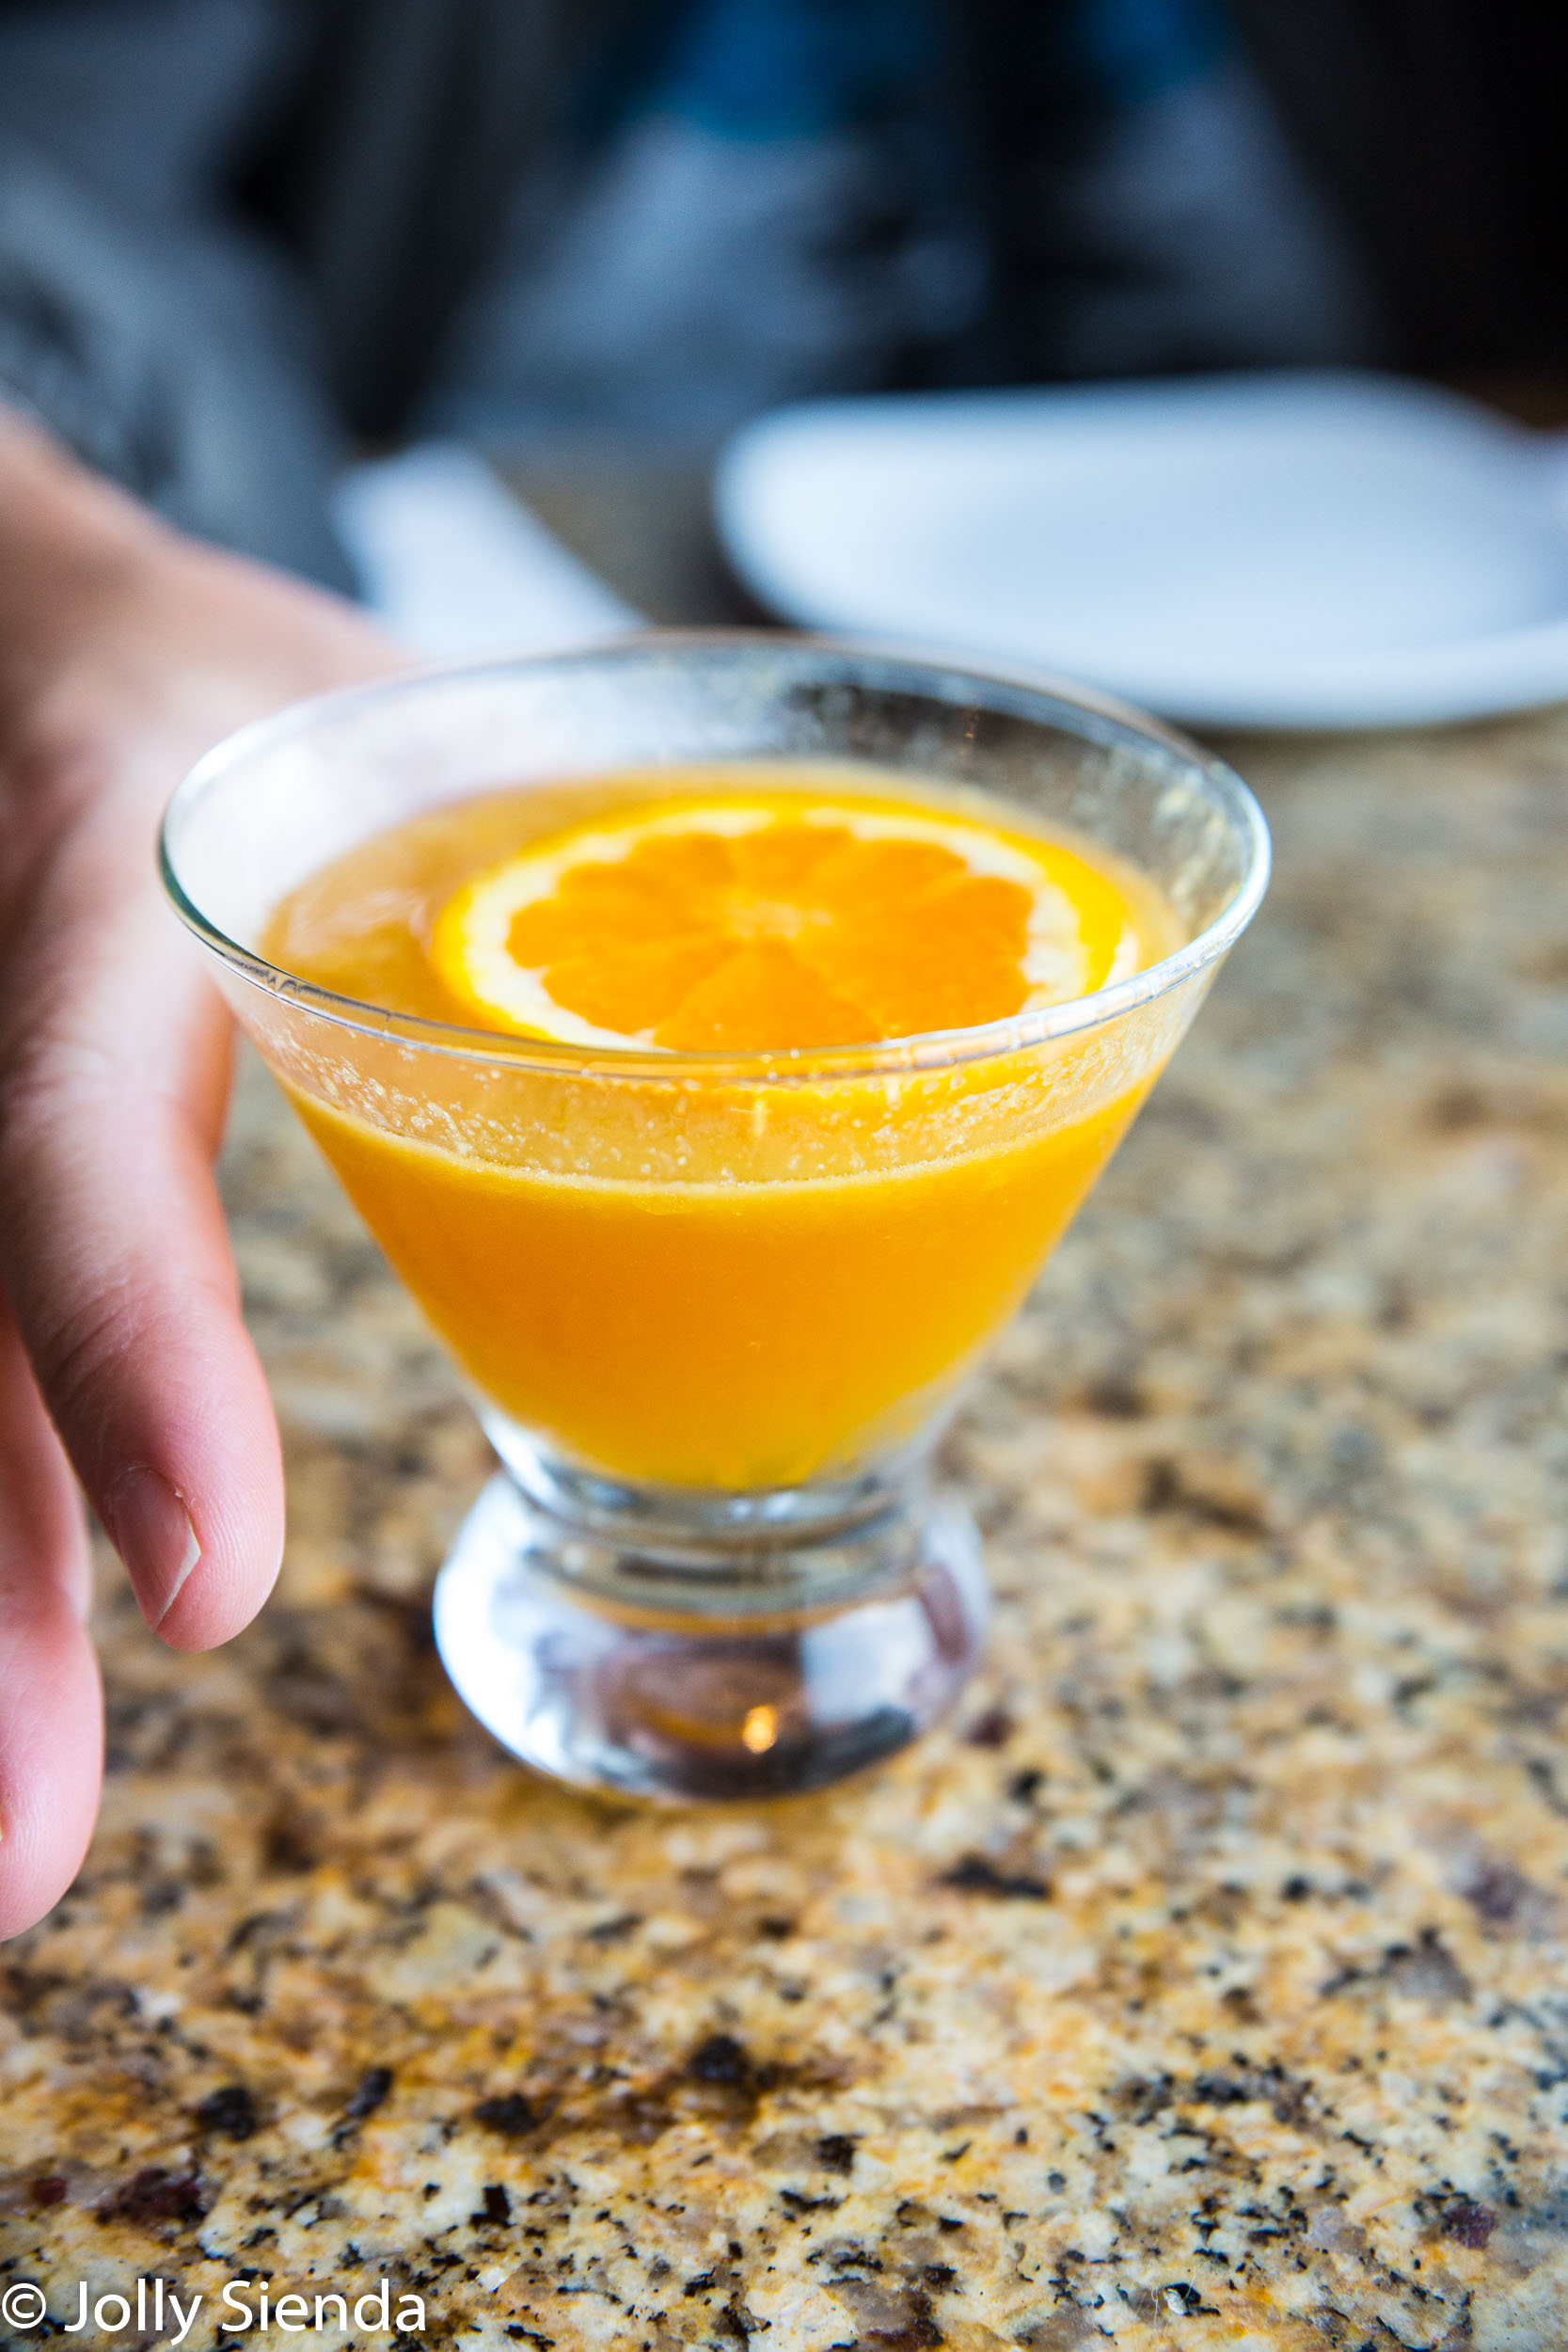 Handling a fresh orange juice and vodka cocktail with a fresh or